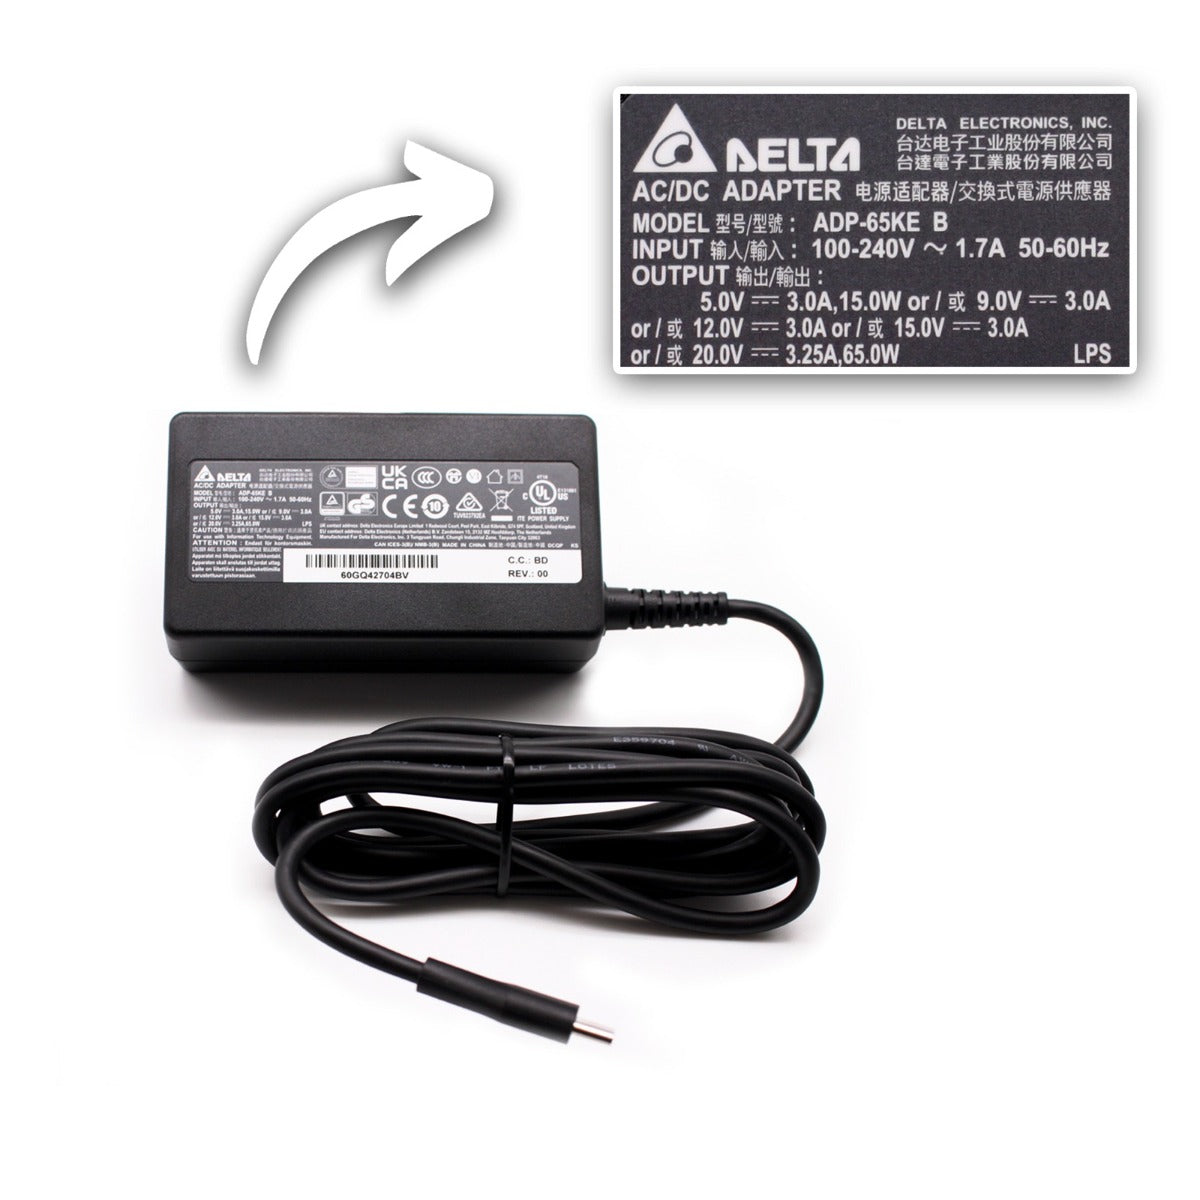 Genuine Delta Brand 65W USB-C Type C AC Adapter Power Supply Charger Compatible With SAMSUNG GALAXY BOOK PRO 4G LTE